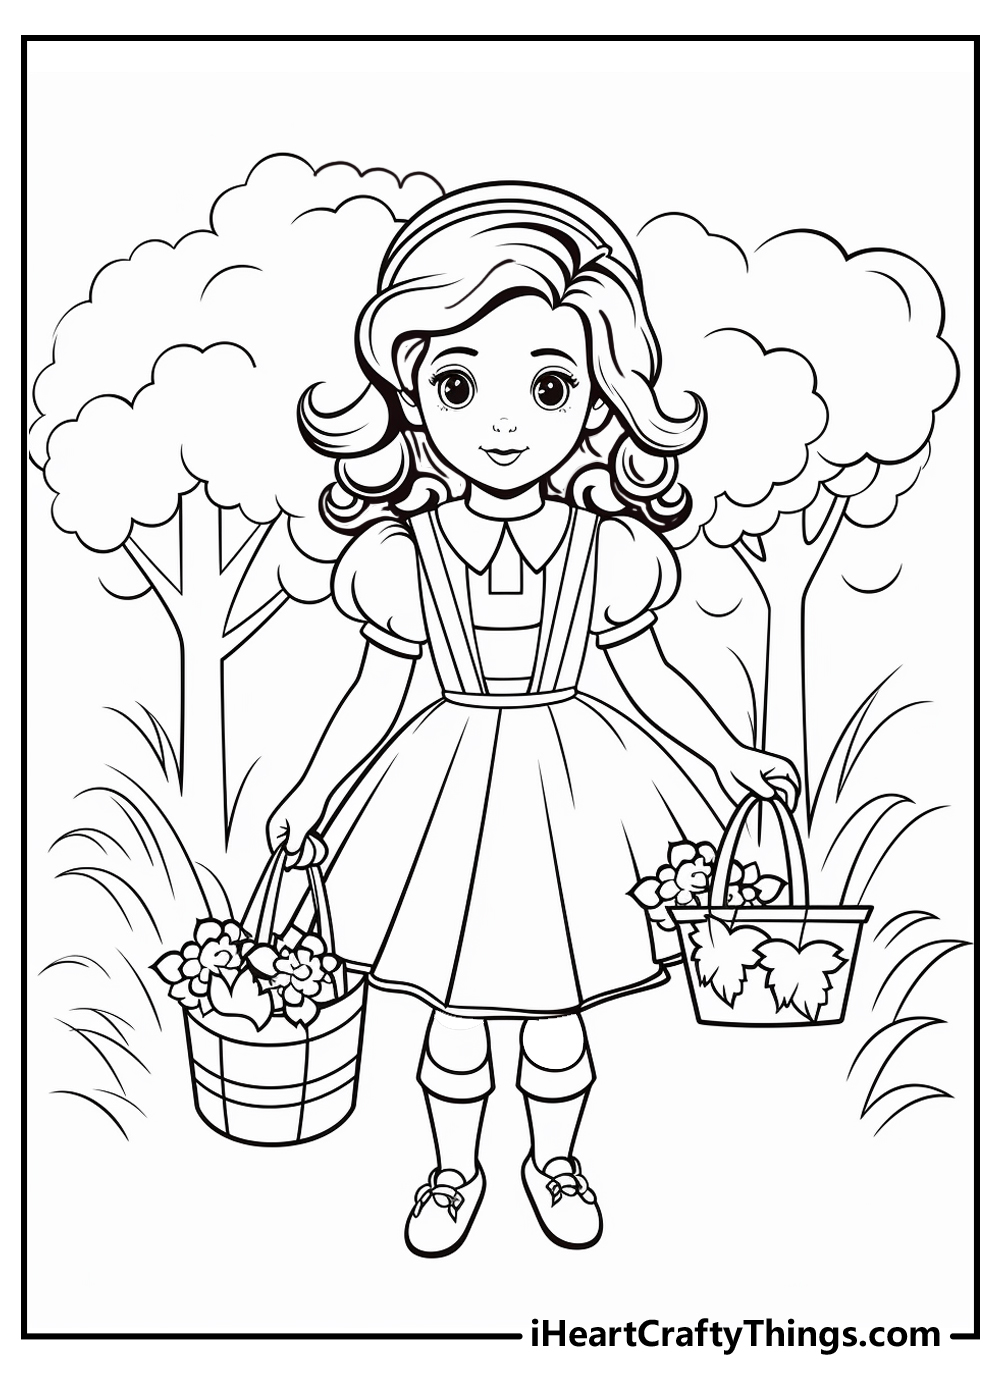 Dorothy wizard of Oz coloring pages